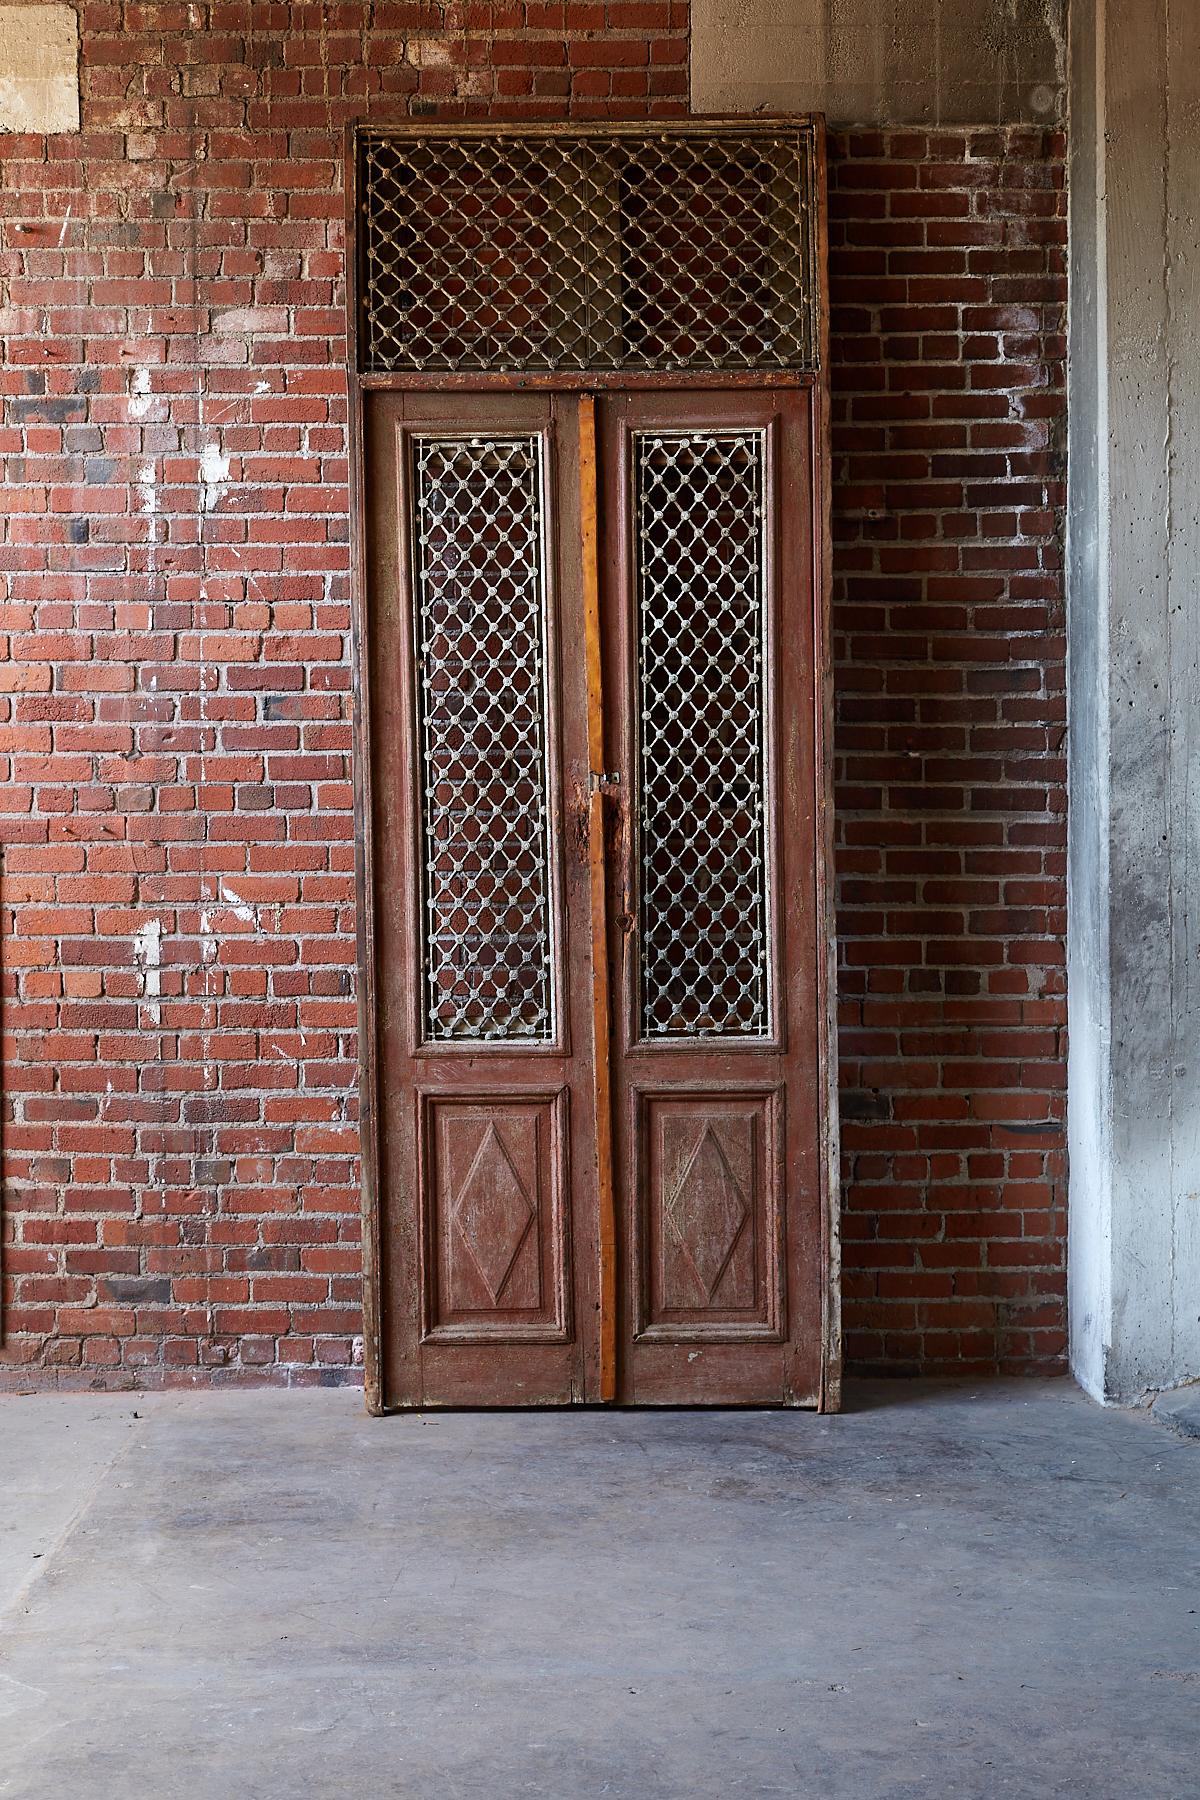 Monumental pair of 19th century French entry doors and transom mounted in a frame. Featuring solid cast iron grills with Moorish style geometric decorative patterns. Handsome relief wood panels and door trim. There is a newer piece of wood running